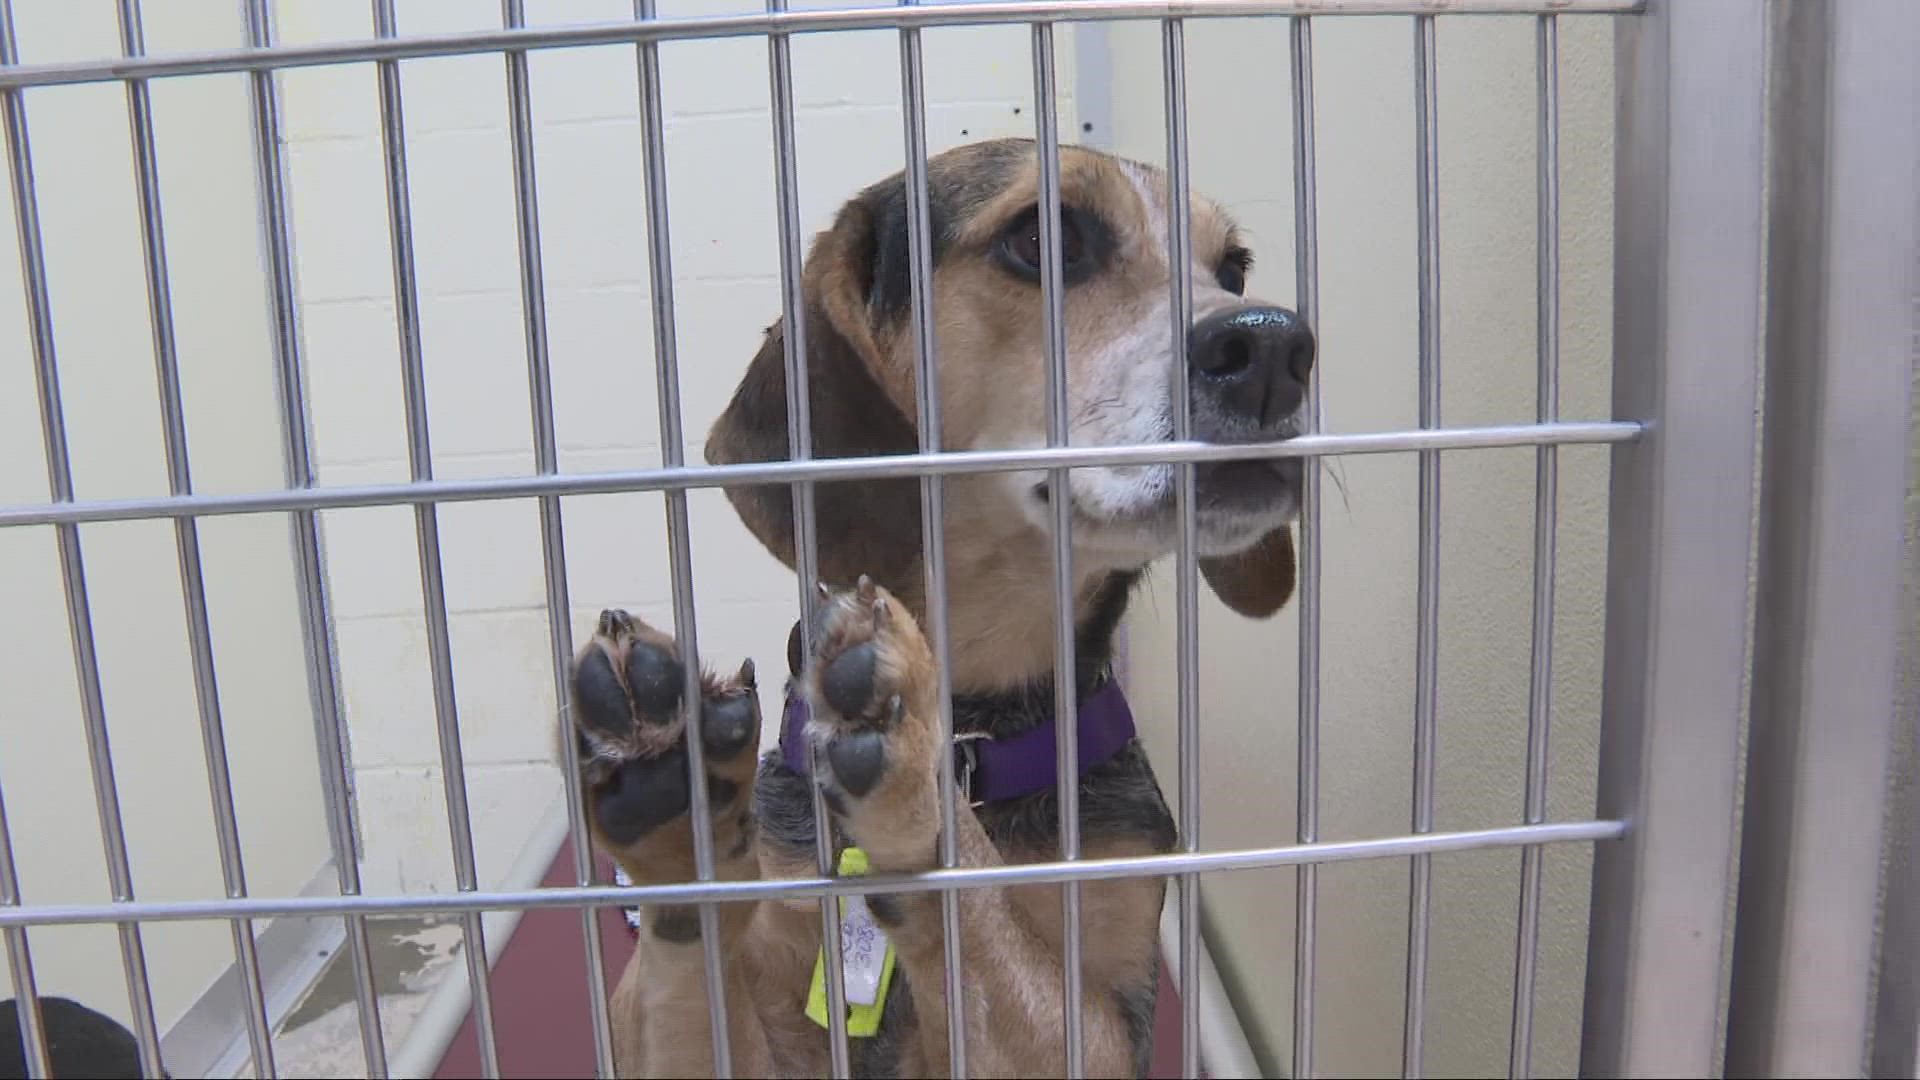 Several of the 41 dogs will be available for adoption as soon as Wednesday, with others ready by this weekend.